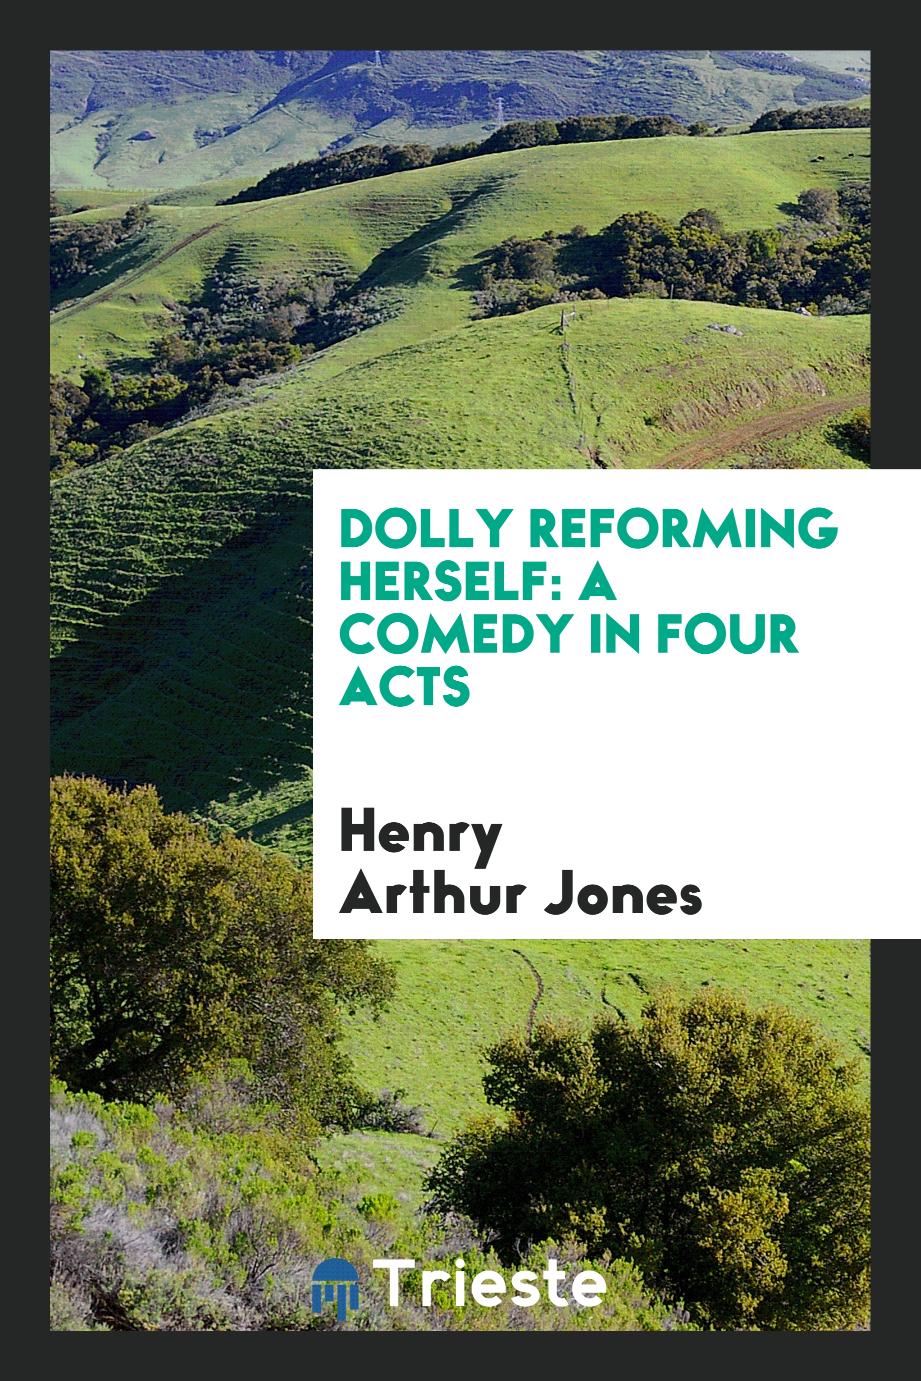 Dolly Reforming Herself: A Comedy in Four Acts